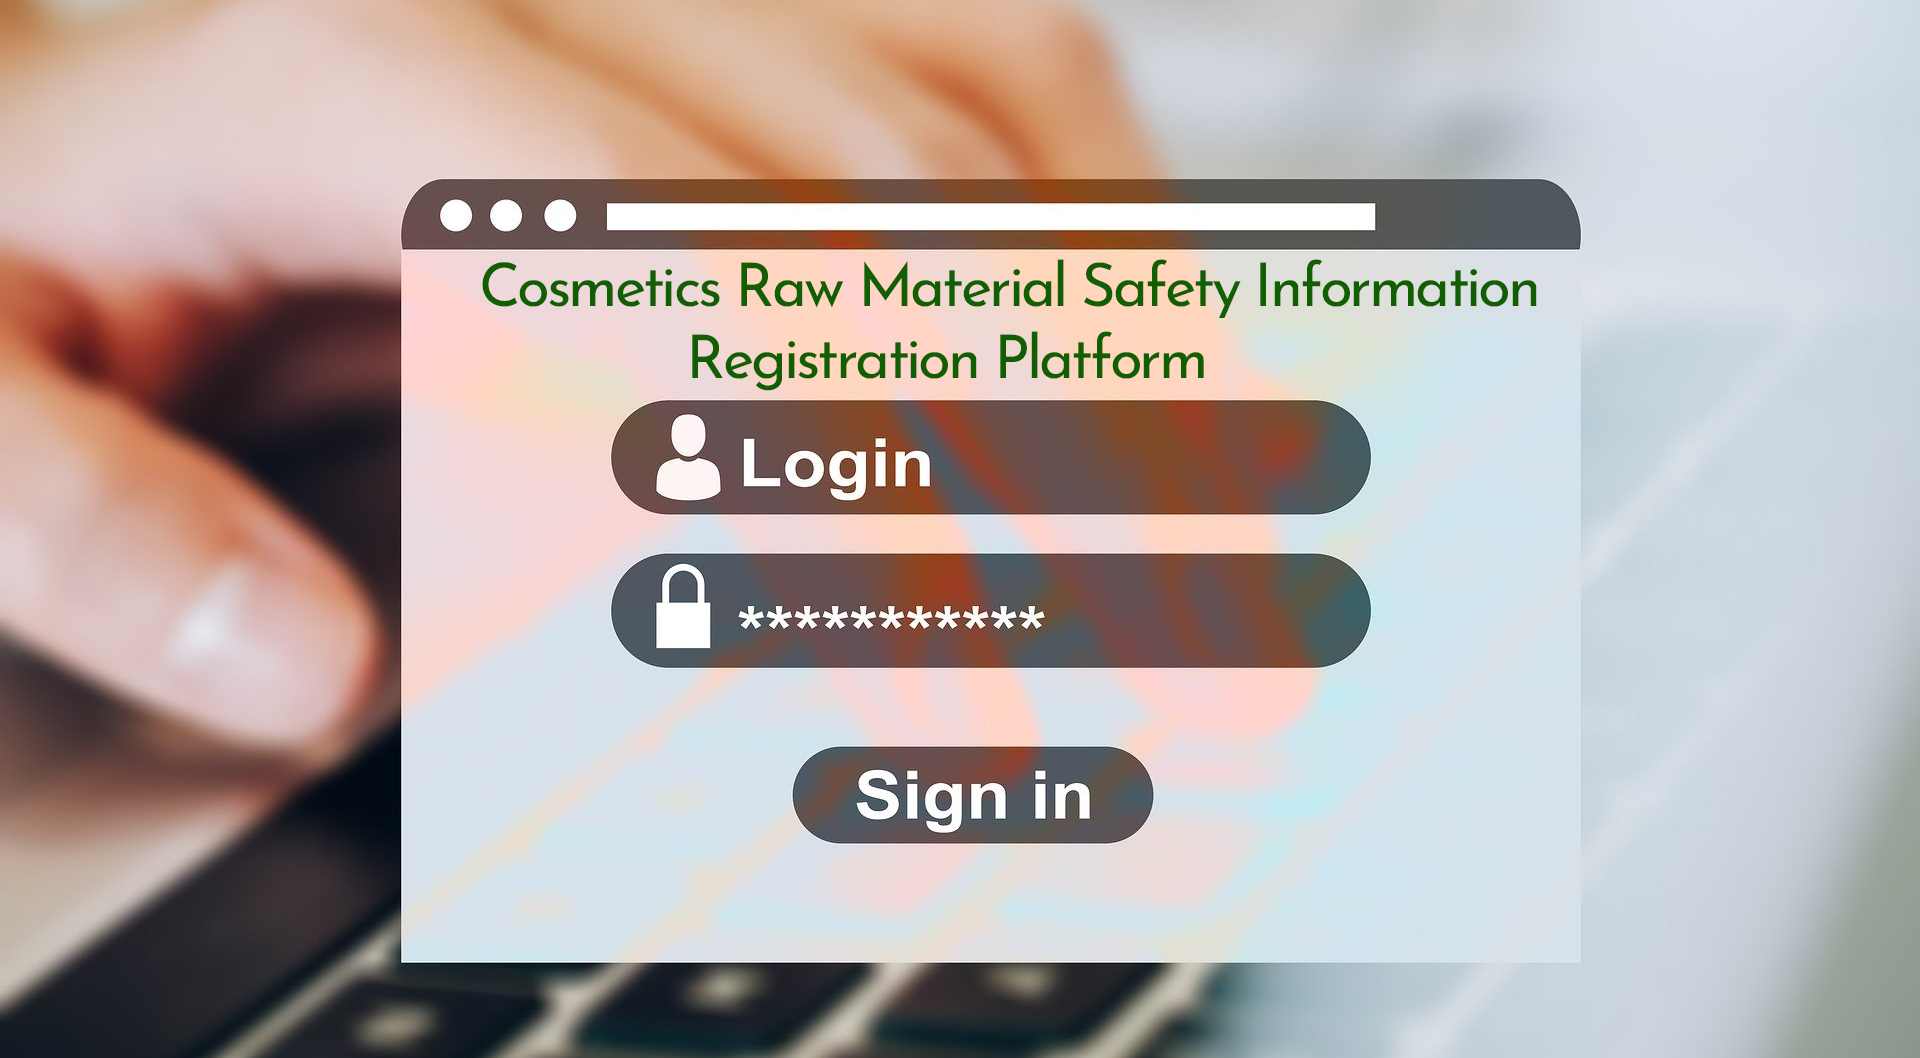 China NMPA Launches Cosmetic Raw Material Safety Information Registration Platform